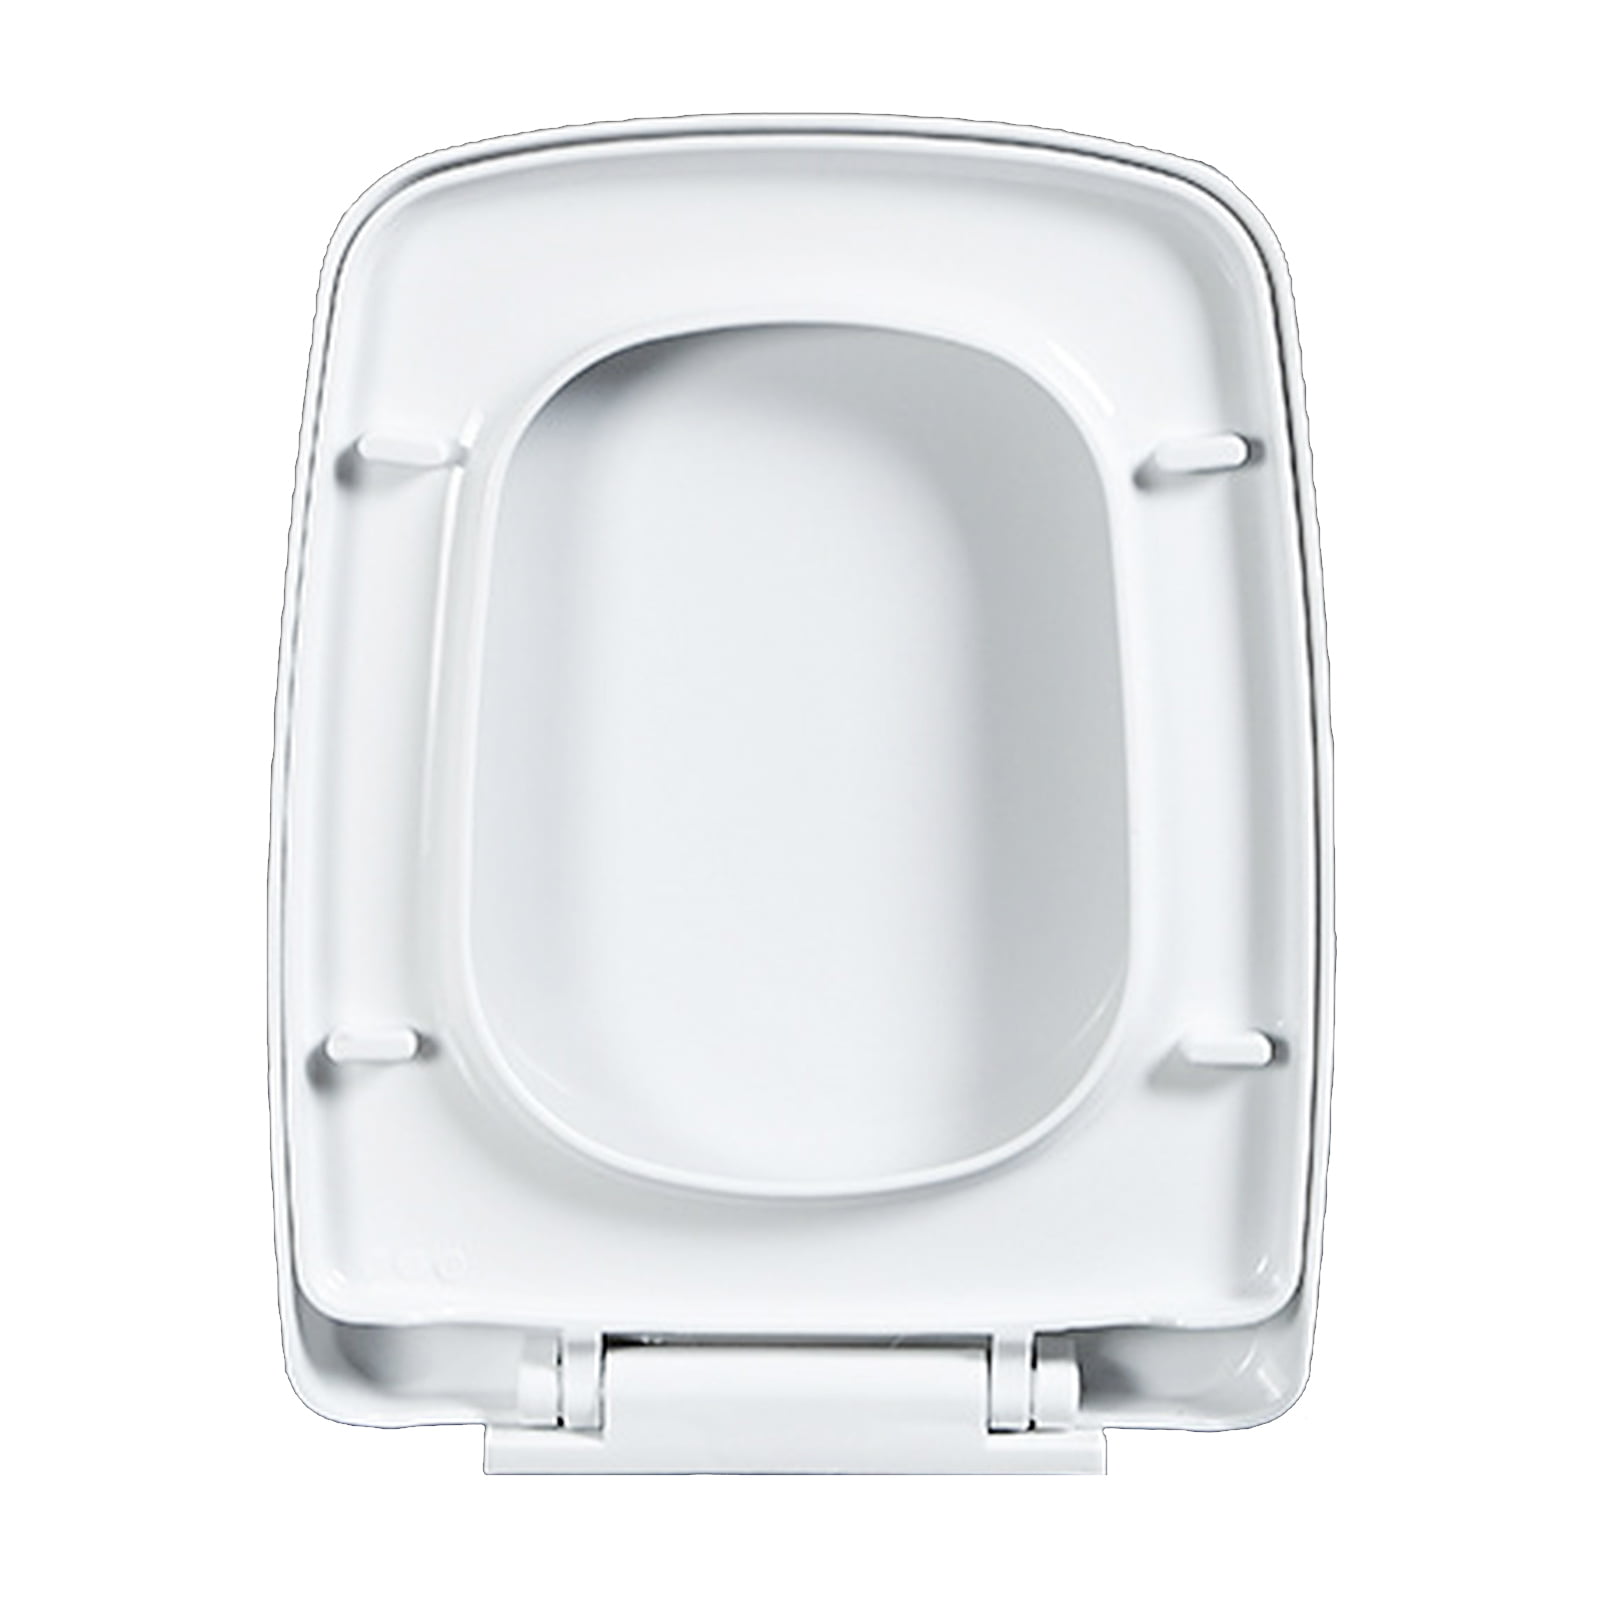 Soft Close Toilet Seat Heavy Duty Quick Release Easy Install Universal Fit White 